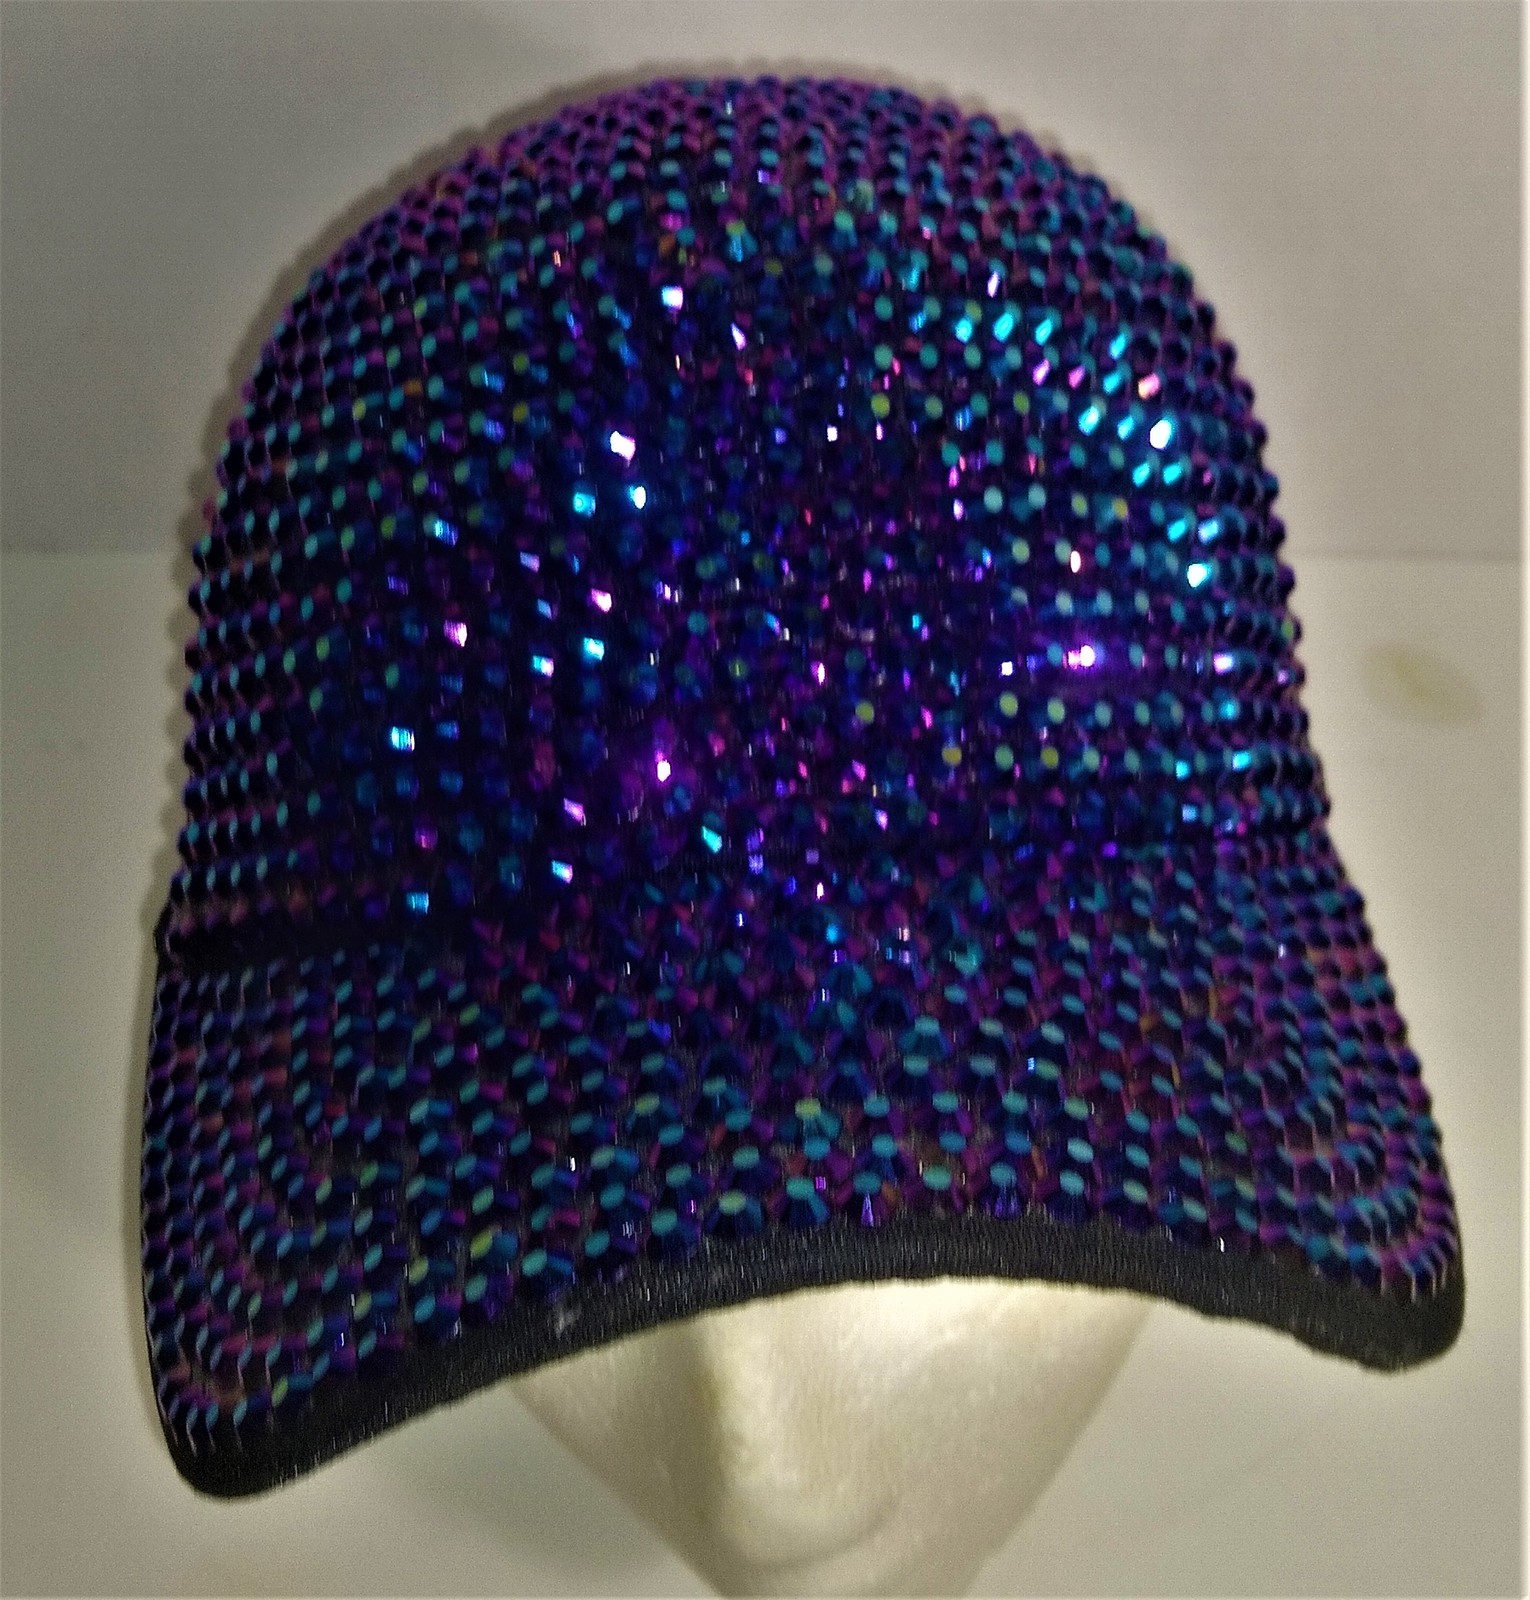 Primary image for Studded Snapback Mesh Cap Multicolored